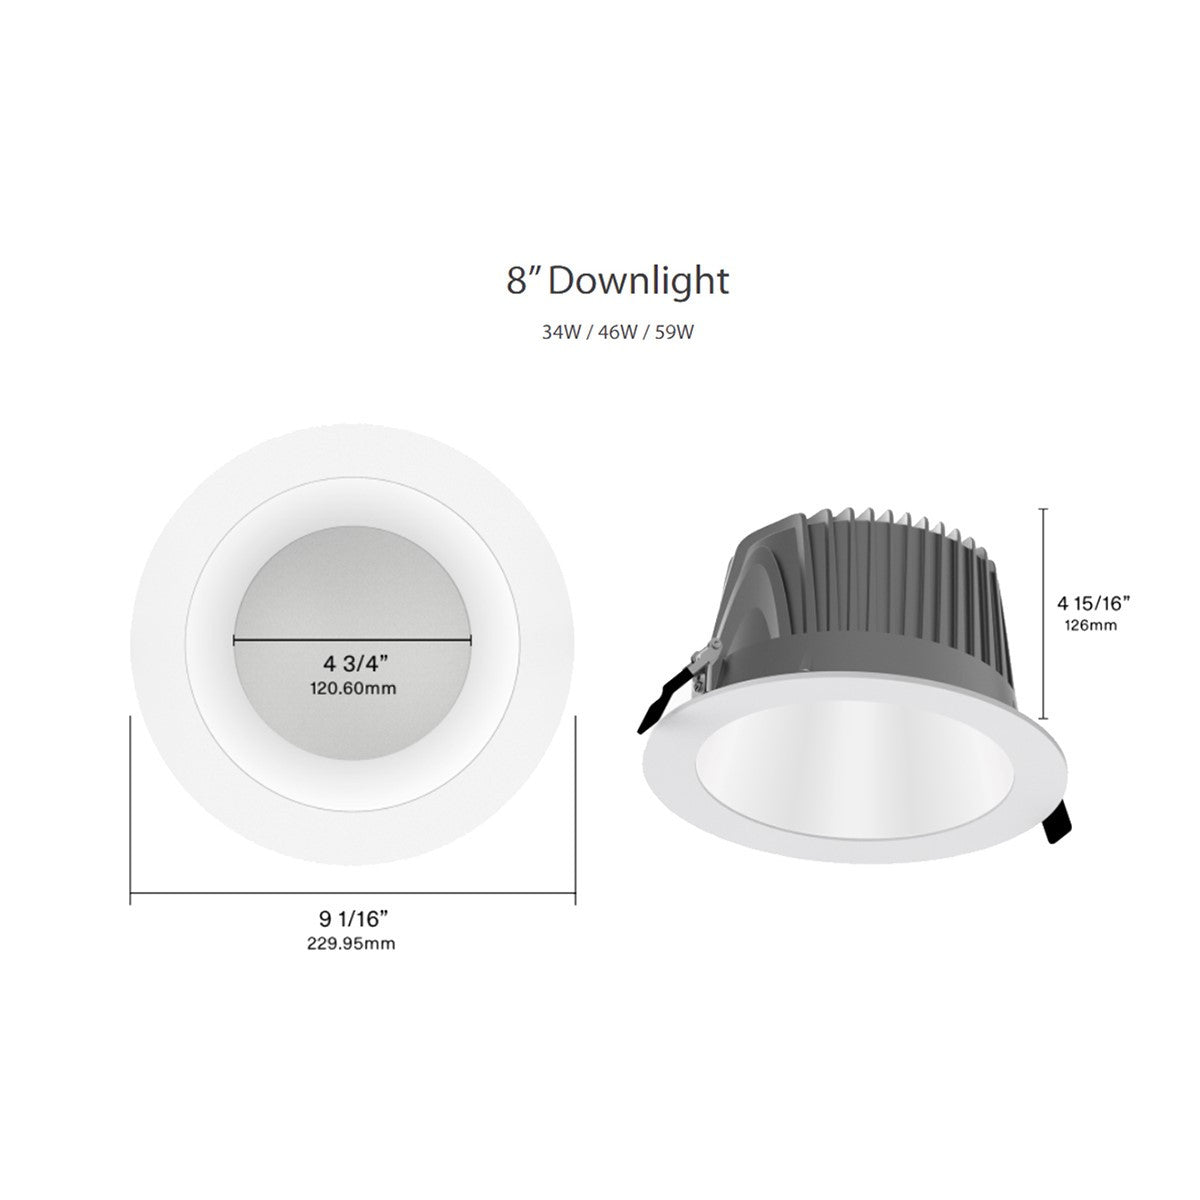 8 Inch LED Deep Regress Commercial Downlight, Field Adjustable 34/46/59W, 2400/3200/4000 Lumens, 30/35/40/50K, Smooth Trim, Matte Silver Finish